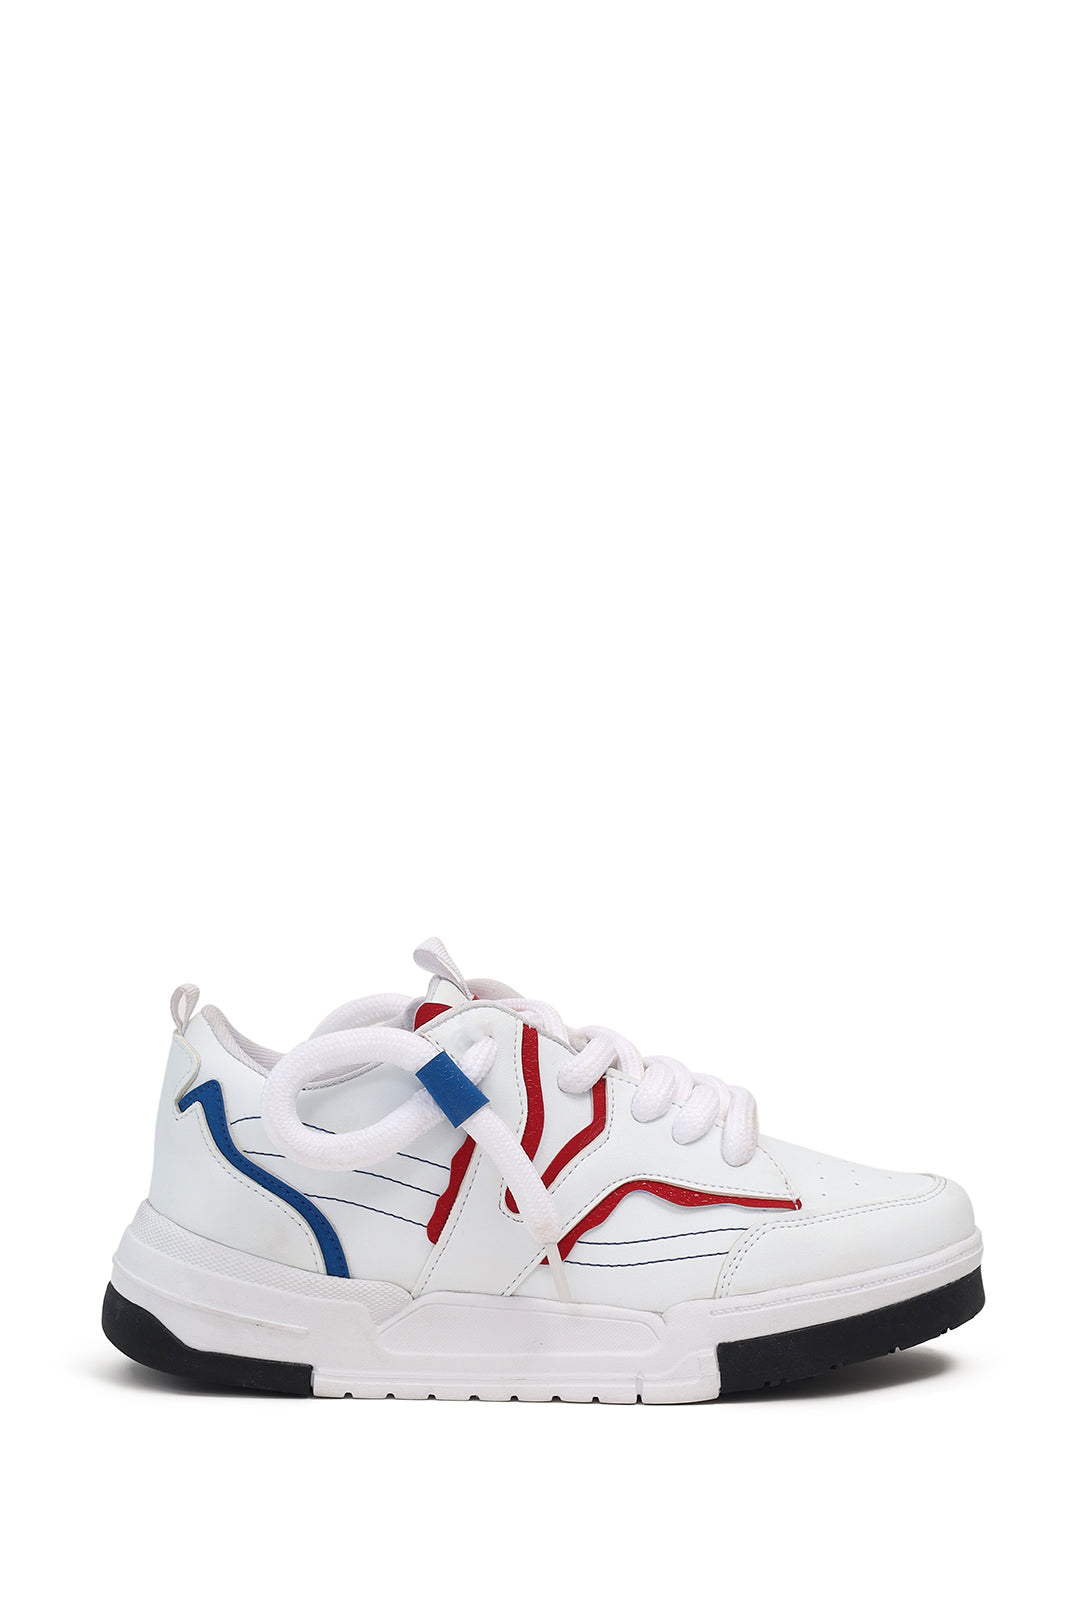 Vapro White/Red Low Top Trainer